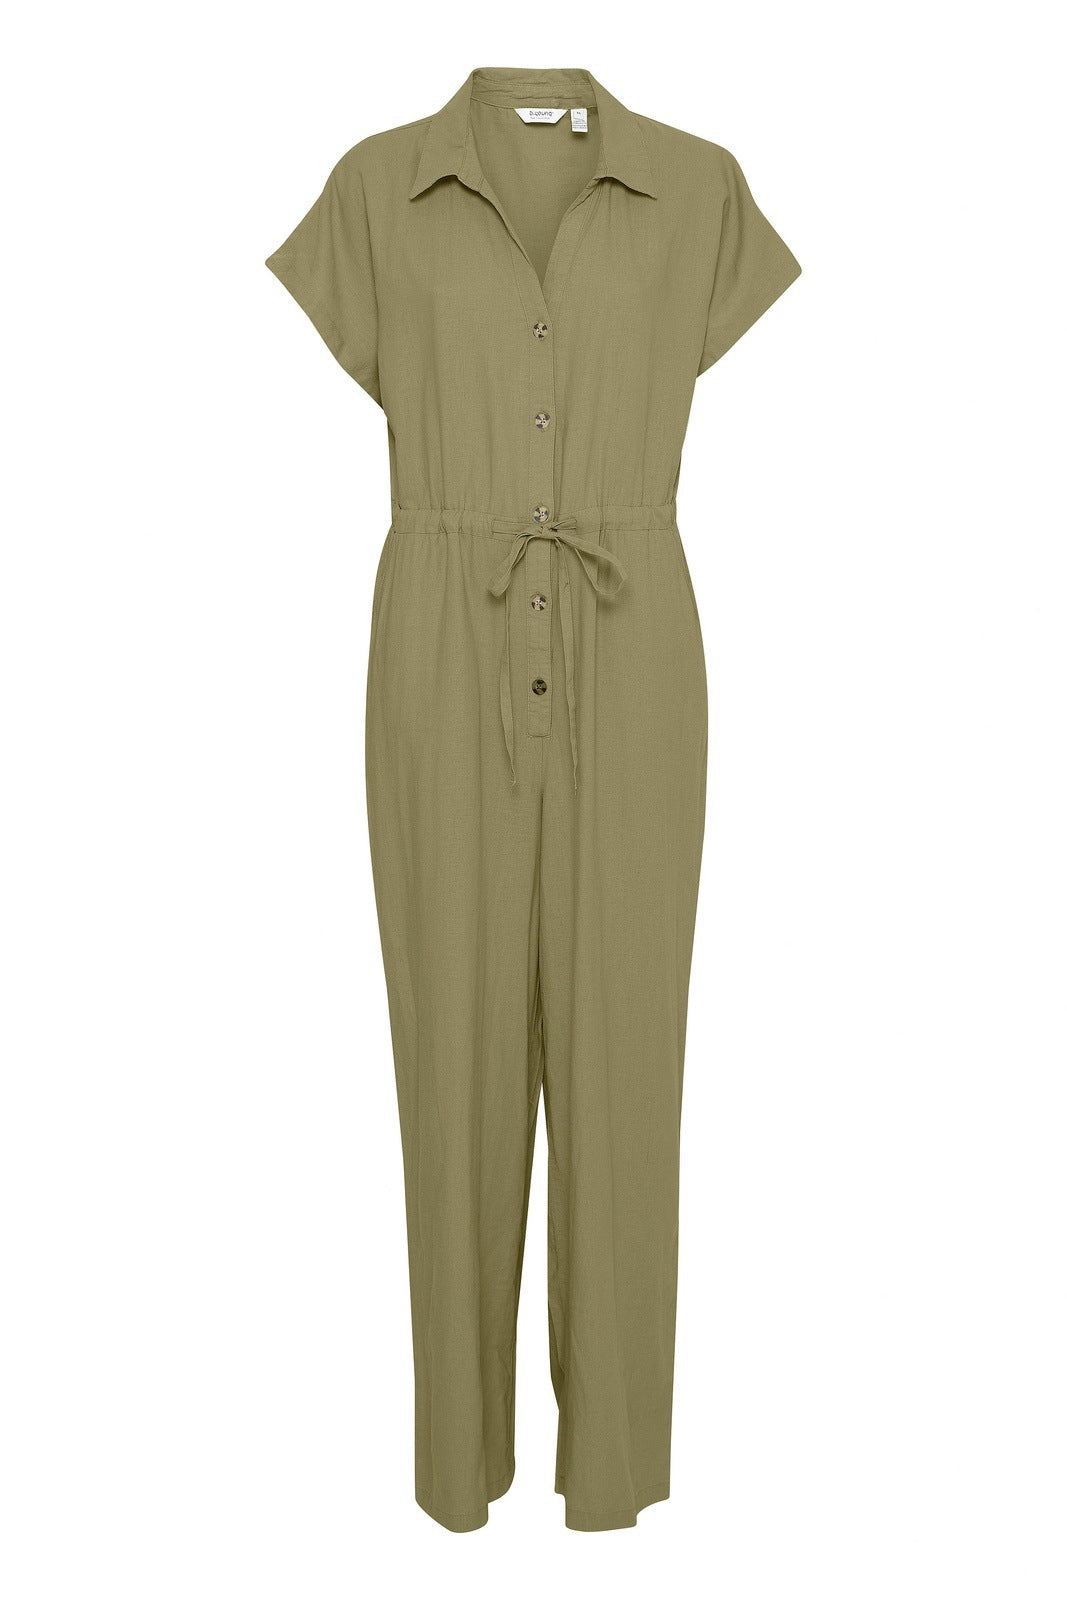 B.young Jumpsuit 1 Shaws Department Stores